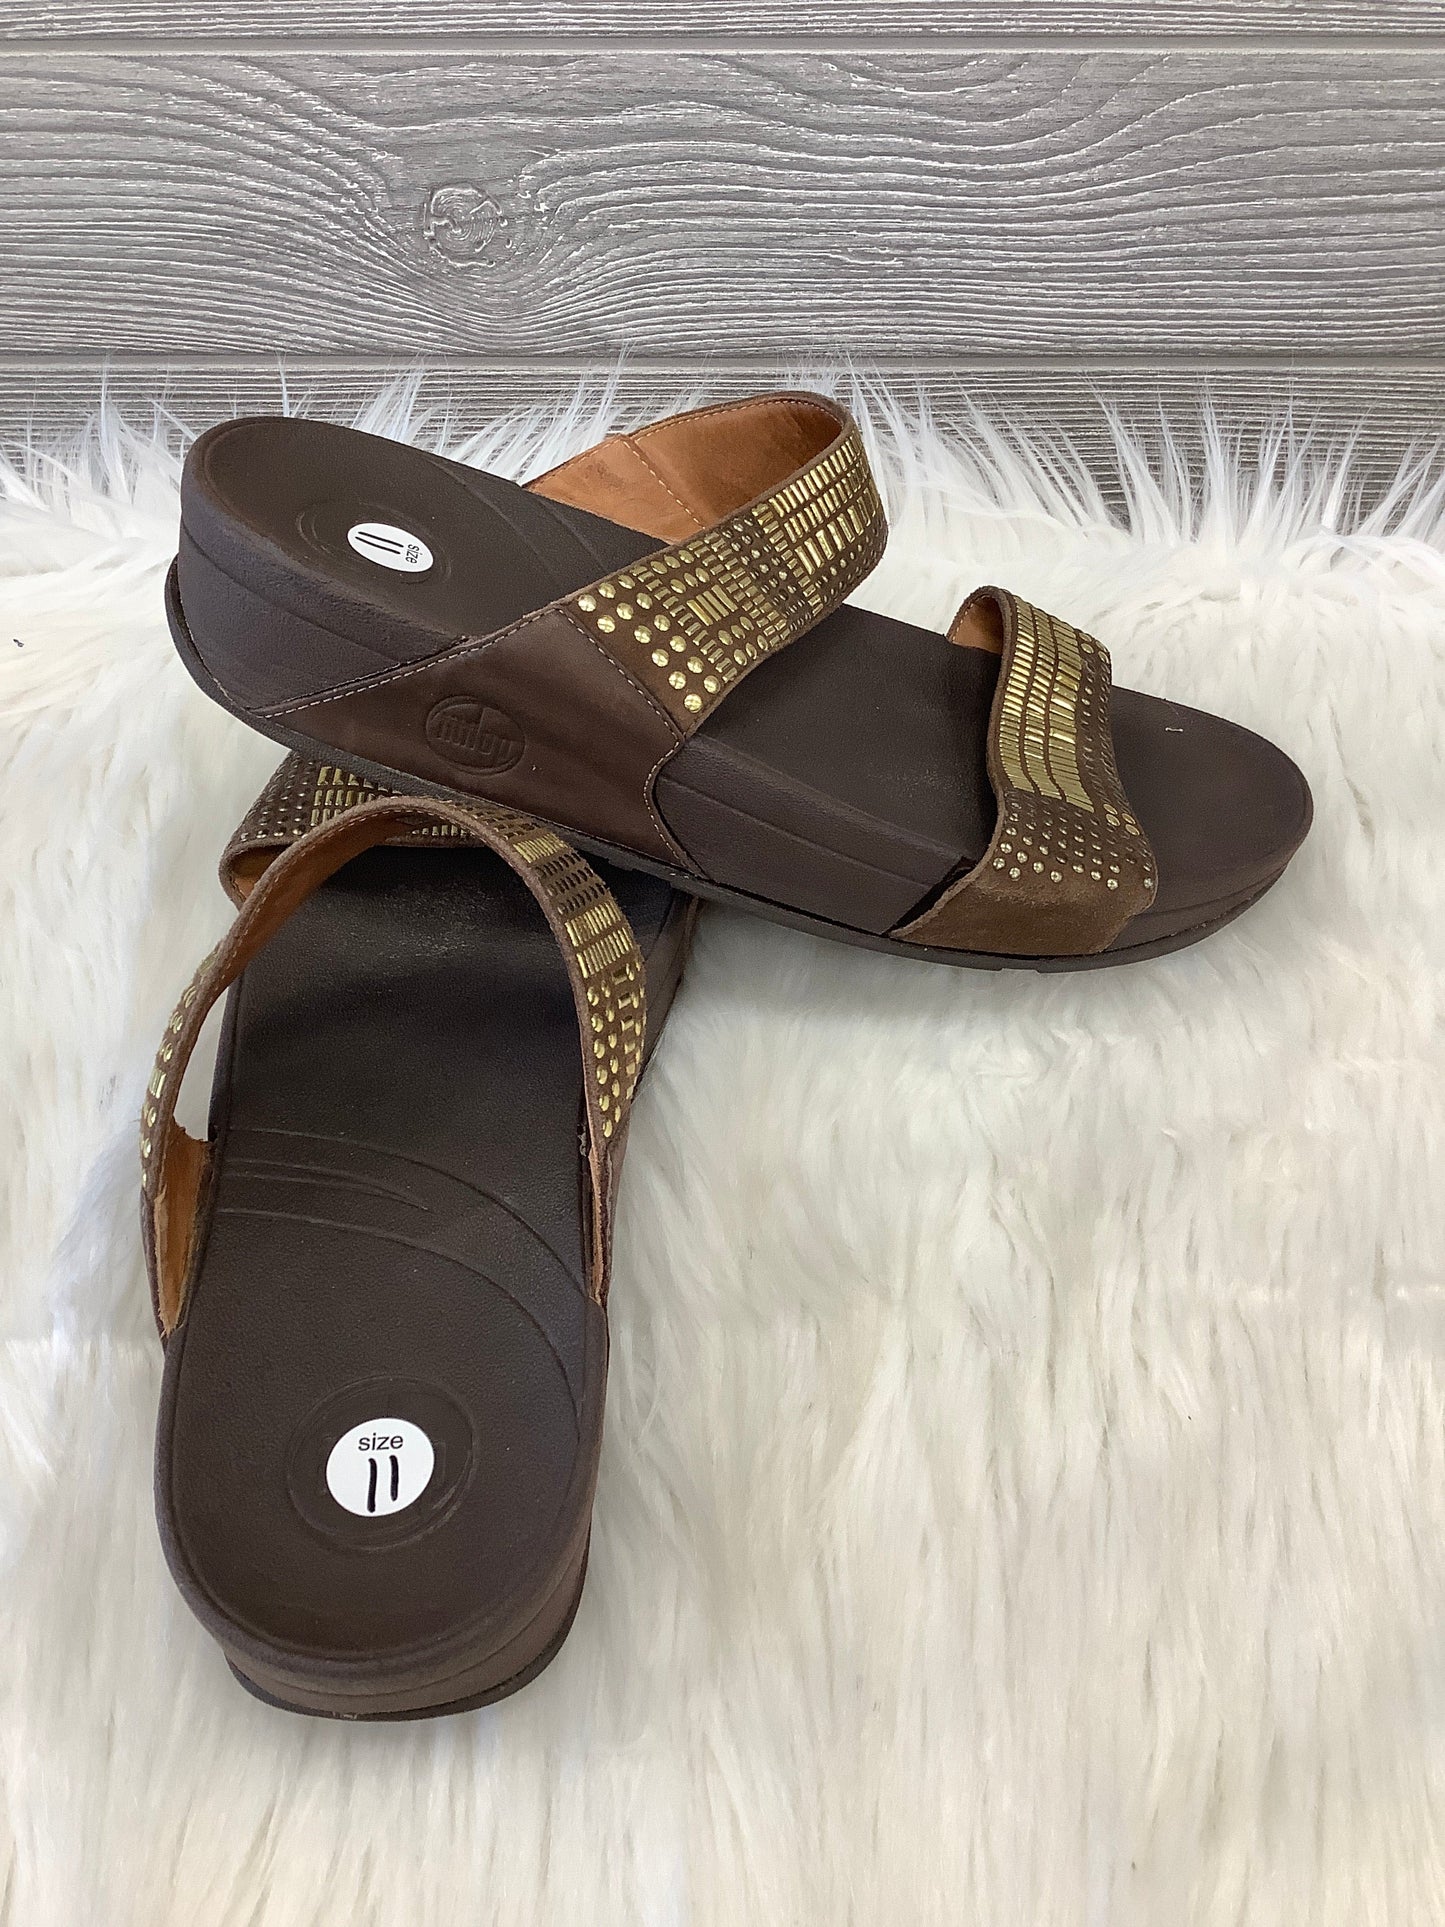 Sandals Flats By Fitflop  Size: 11